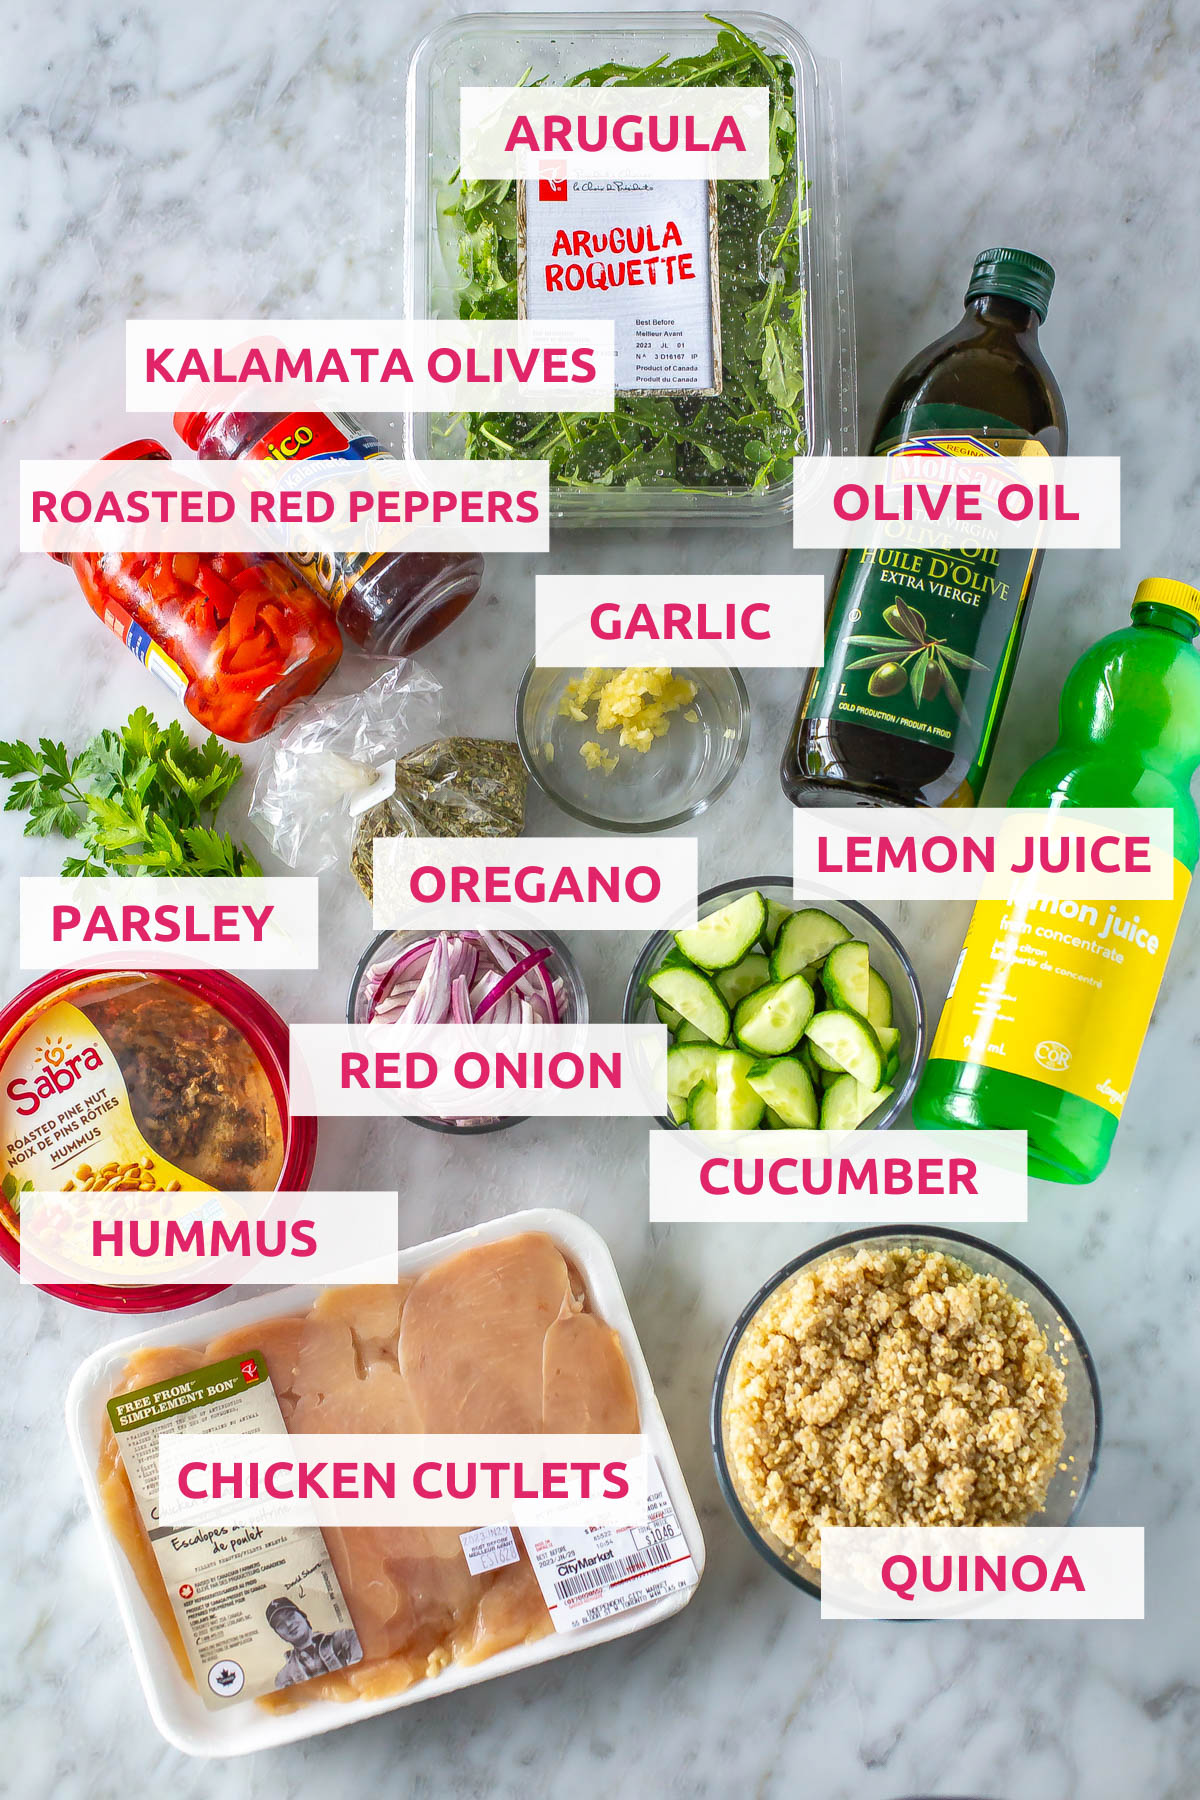 Ingredients for mediterranean bowls: arugula, olives, roasted red peppers, olive oil, parsley, oregano, lemon juice, cucumbers, red onion, hummus, chicken cutlets and quinoa.